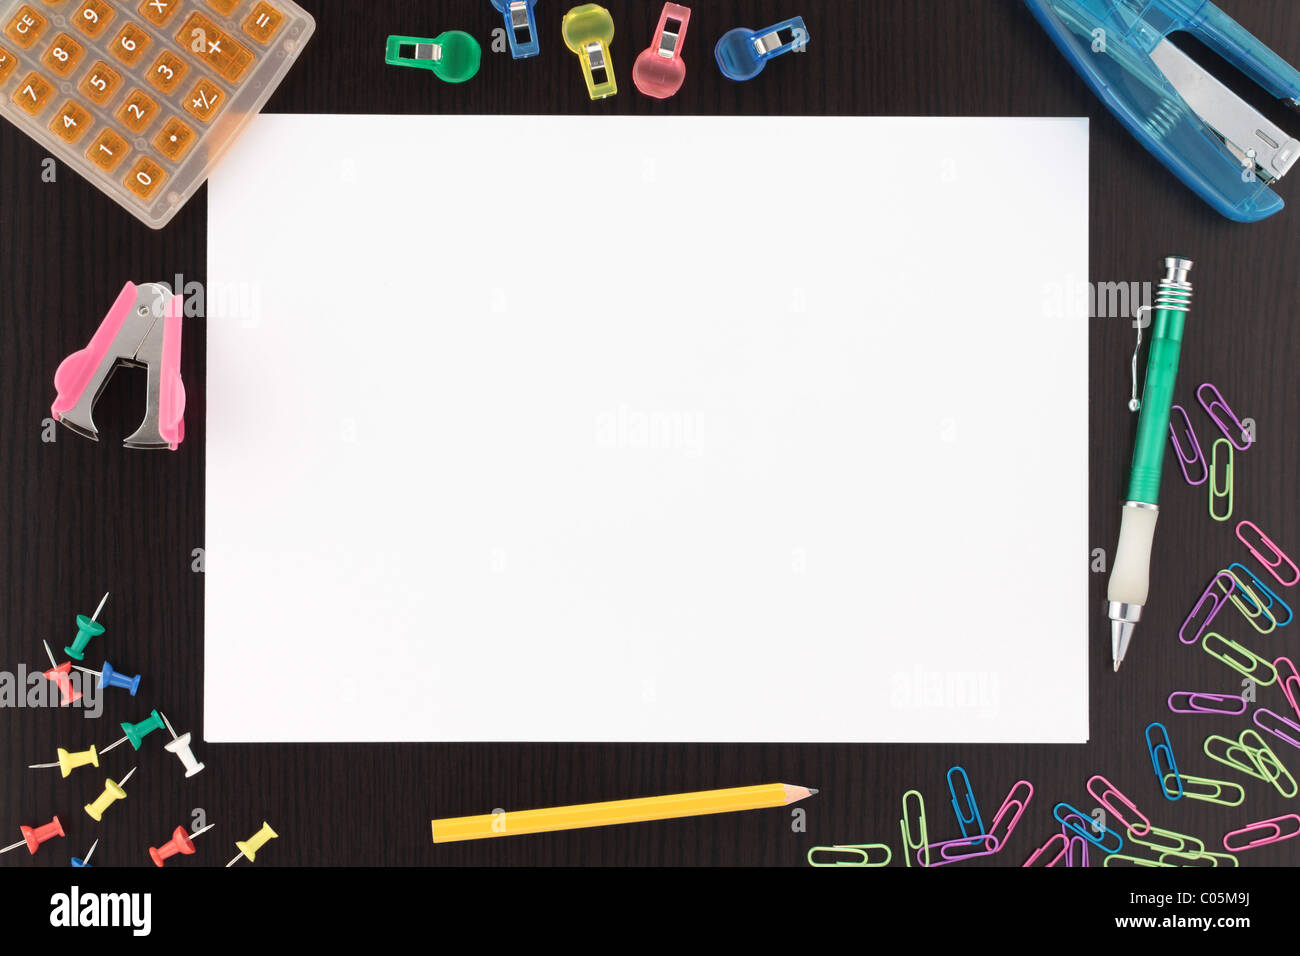 Overview Stationery with Paper and Pen on Desk Stock Photo